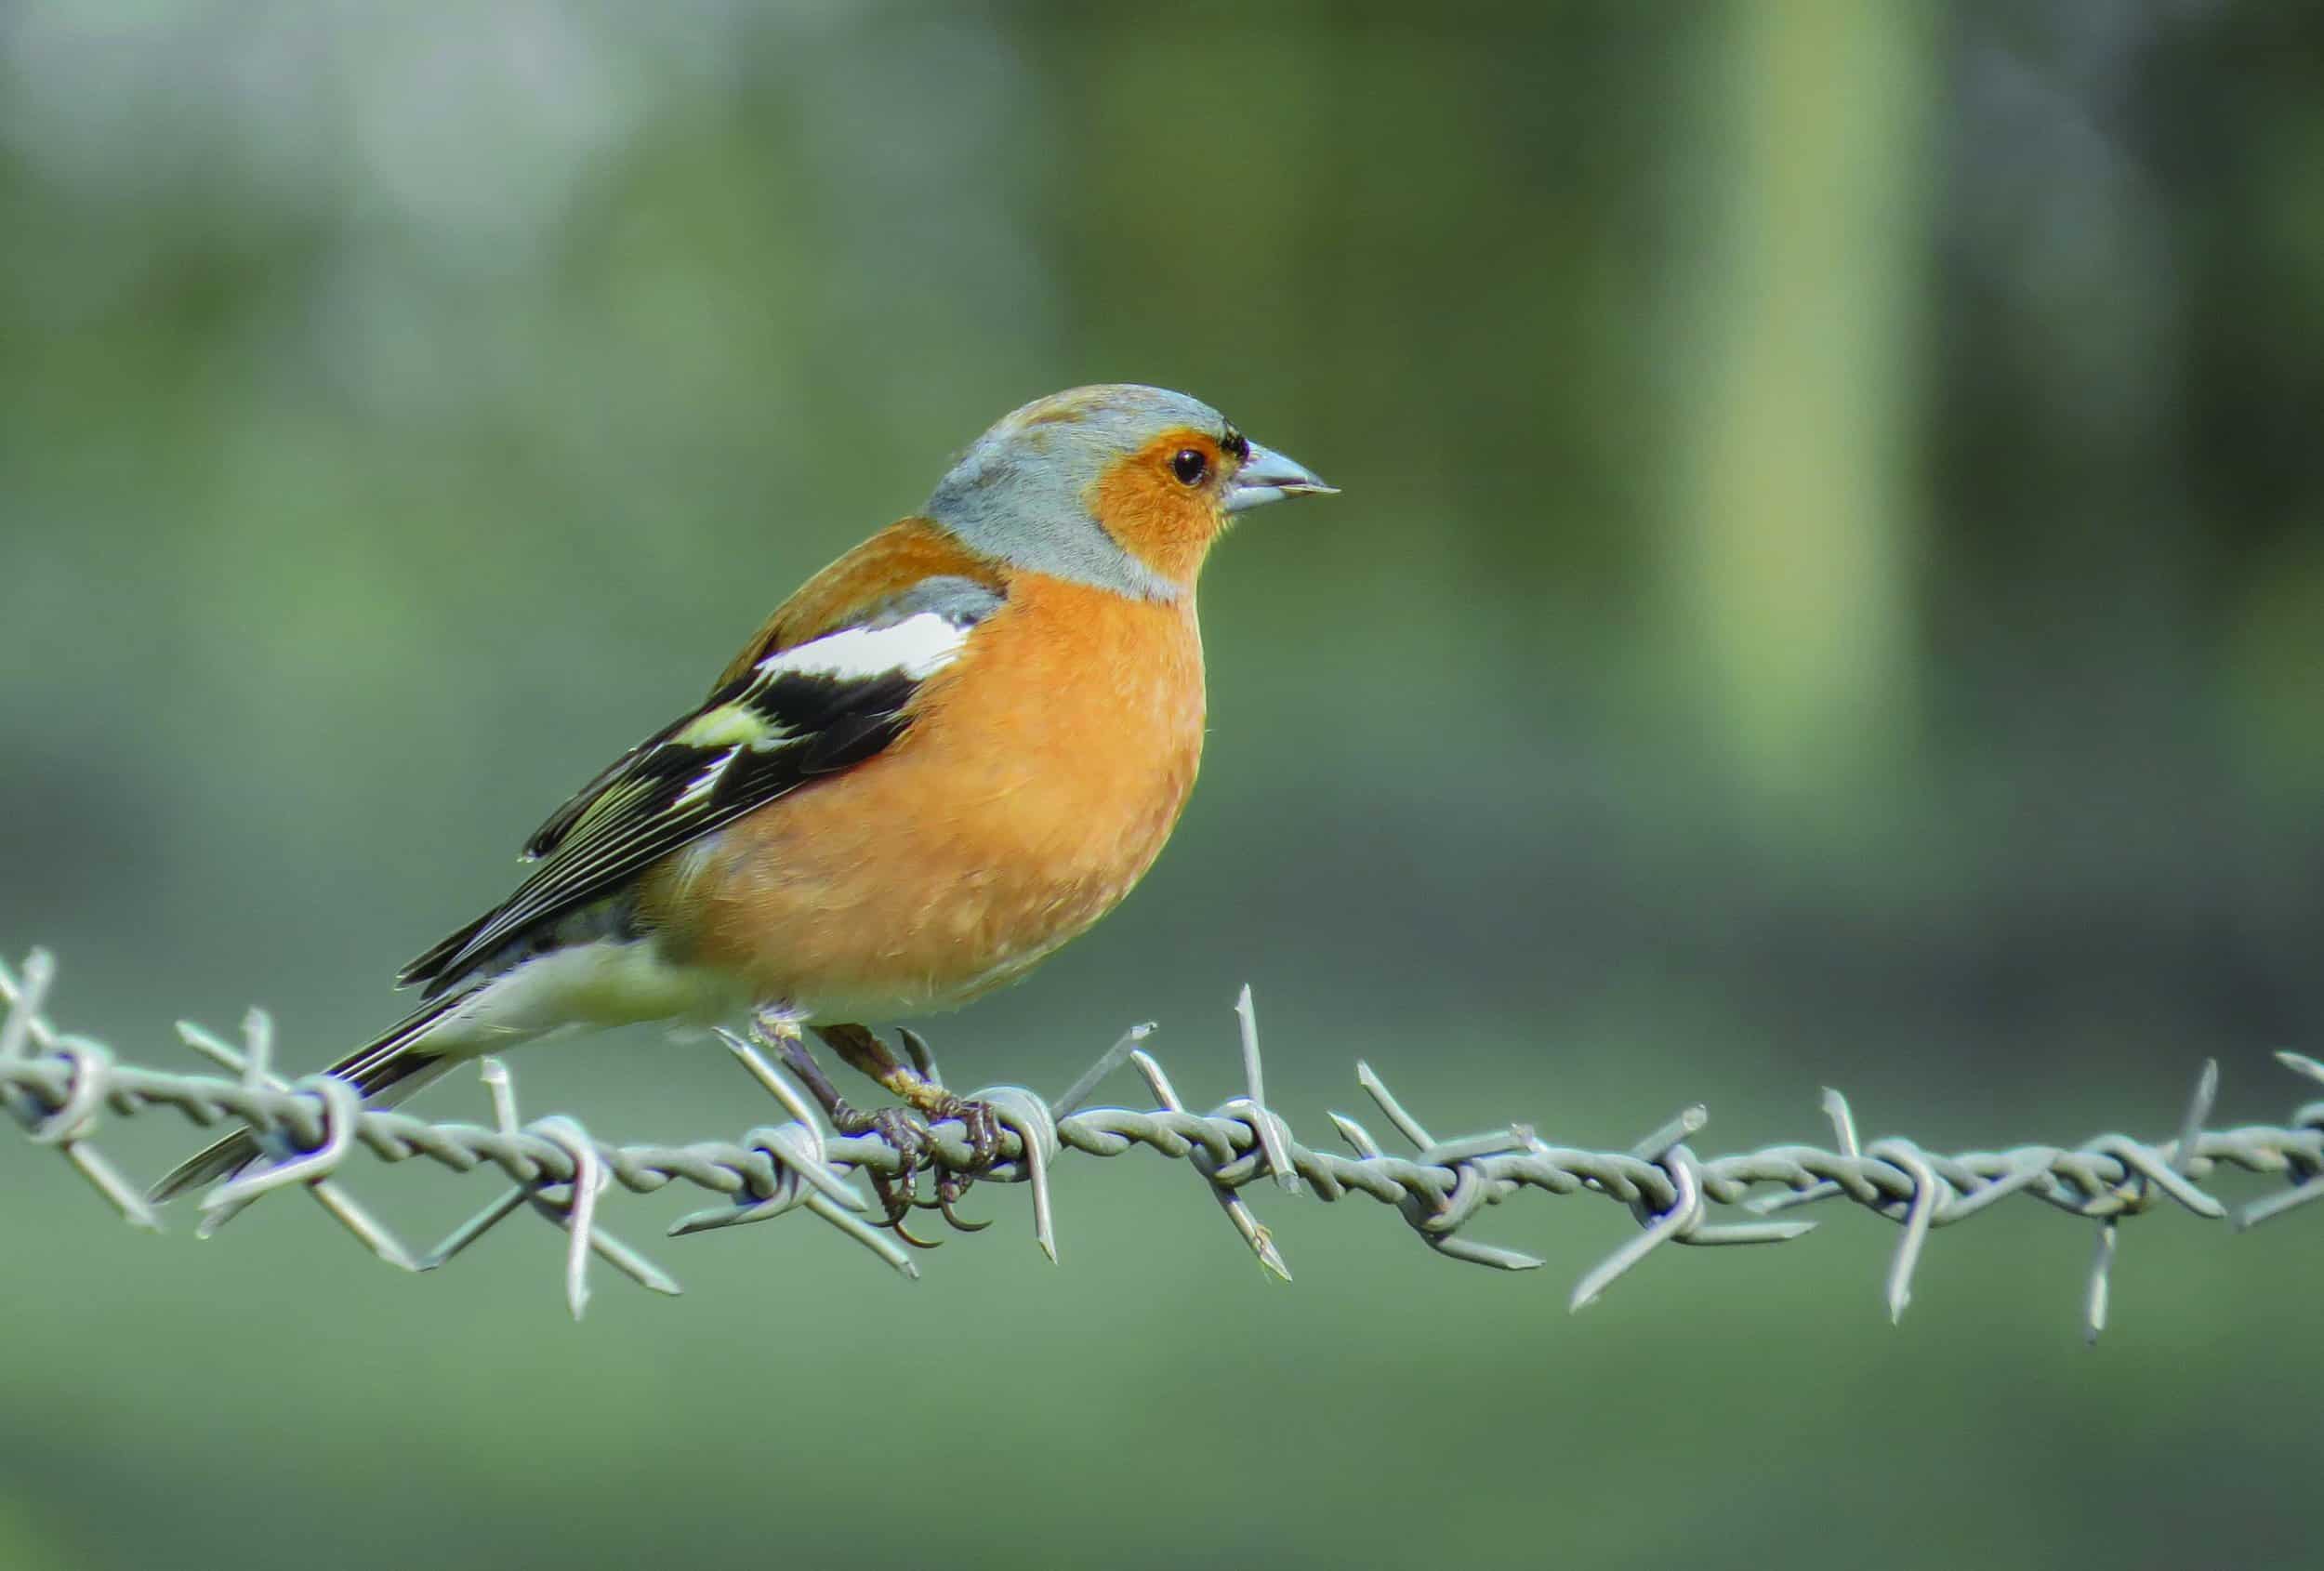 Chaffinch on a wire